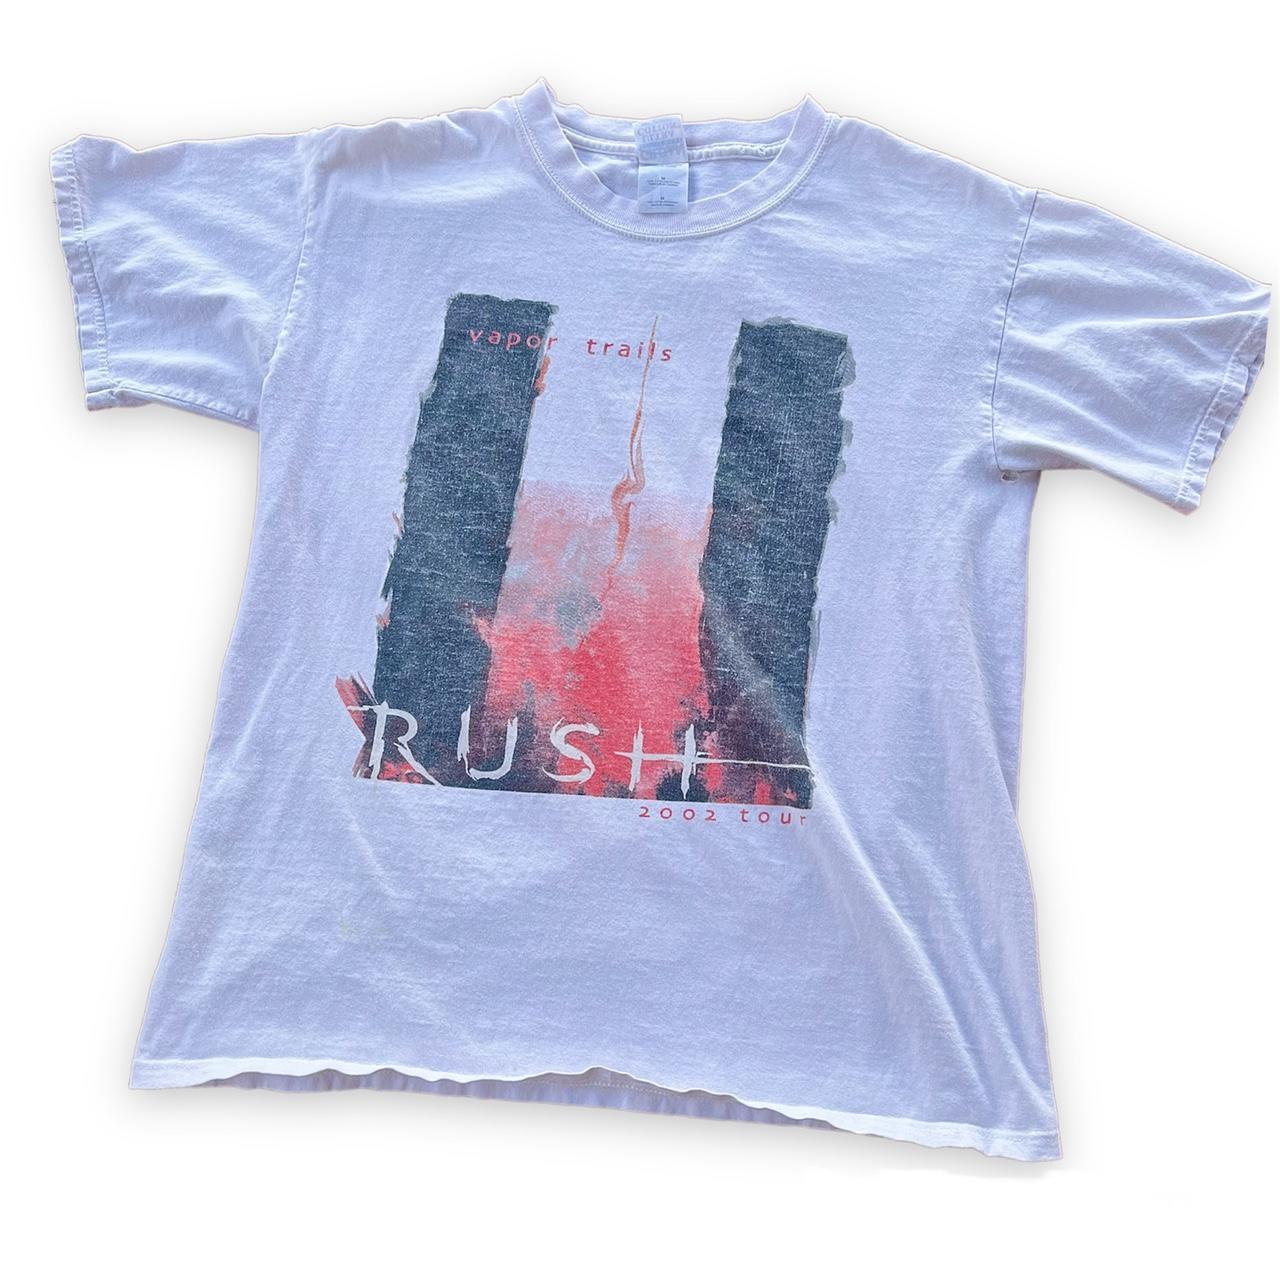 Rush Vapor Trails tour shirt from 2002. Tiny hole in